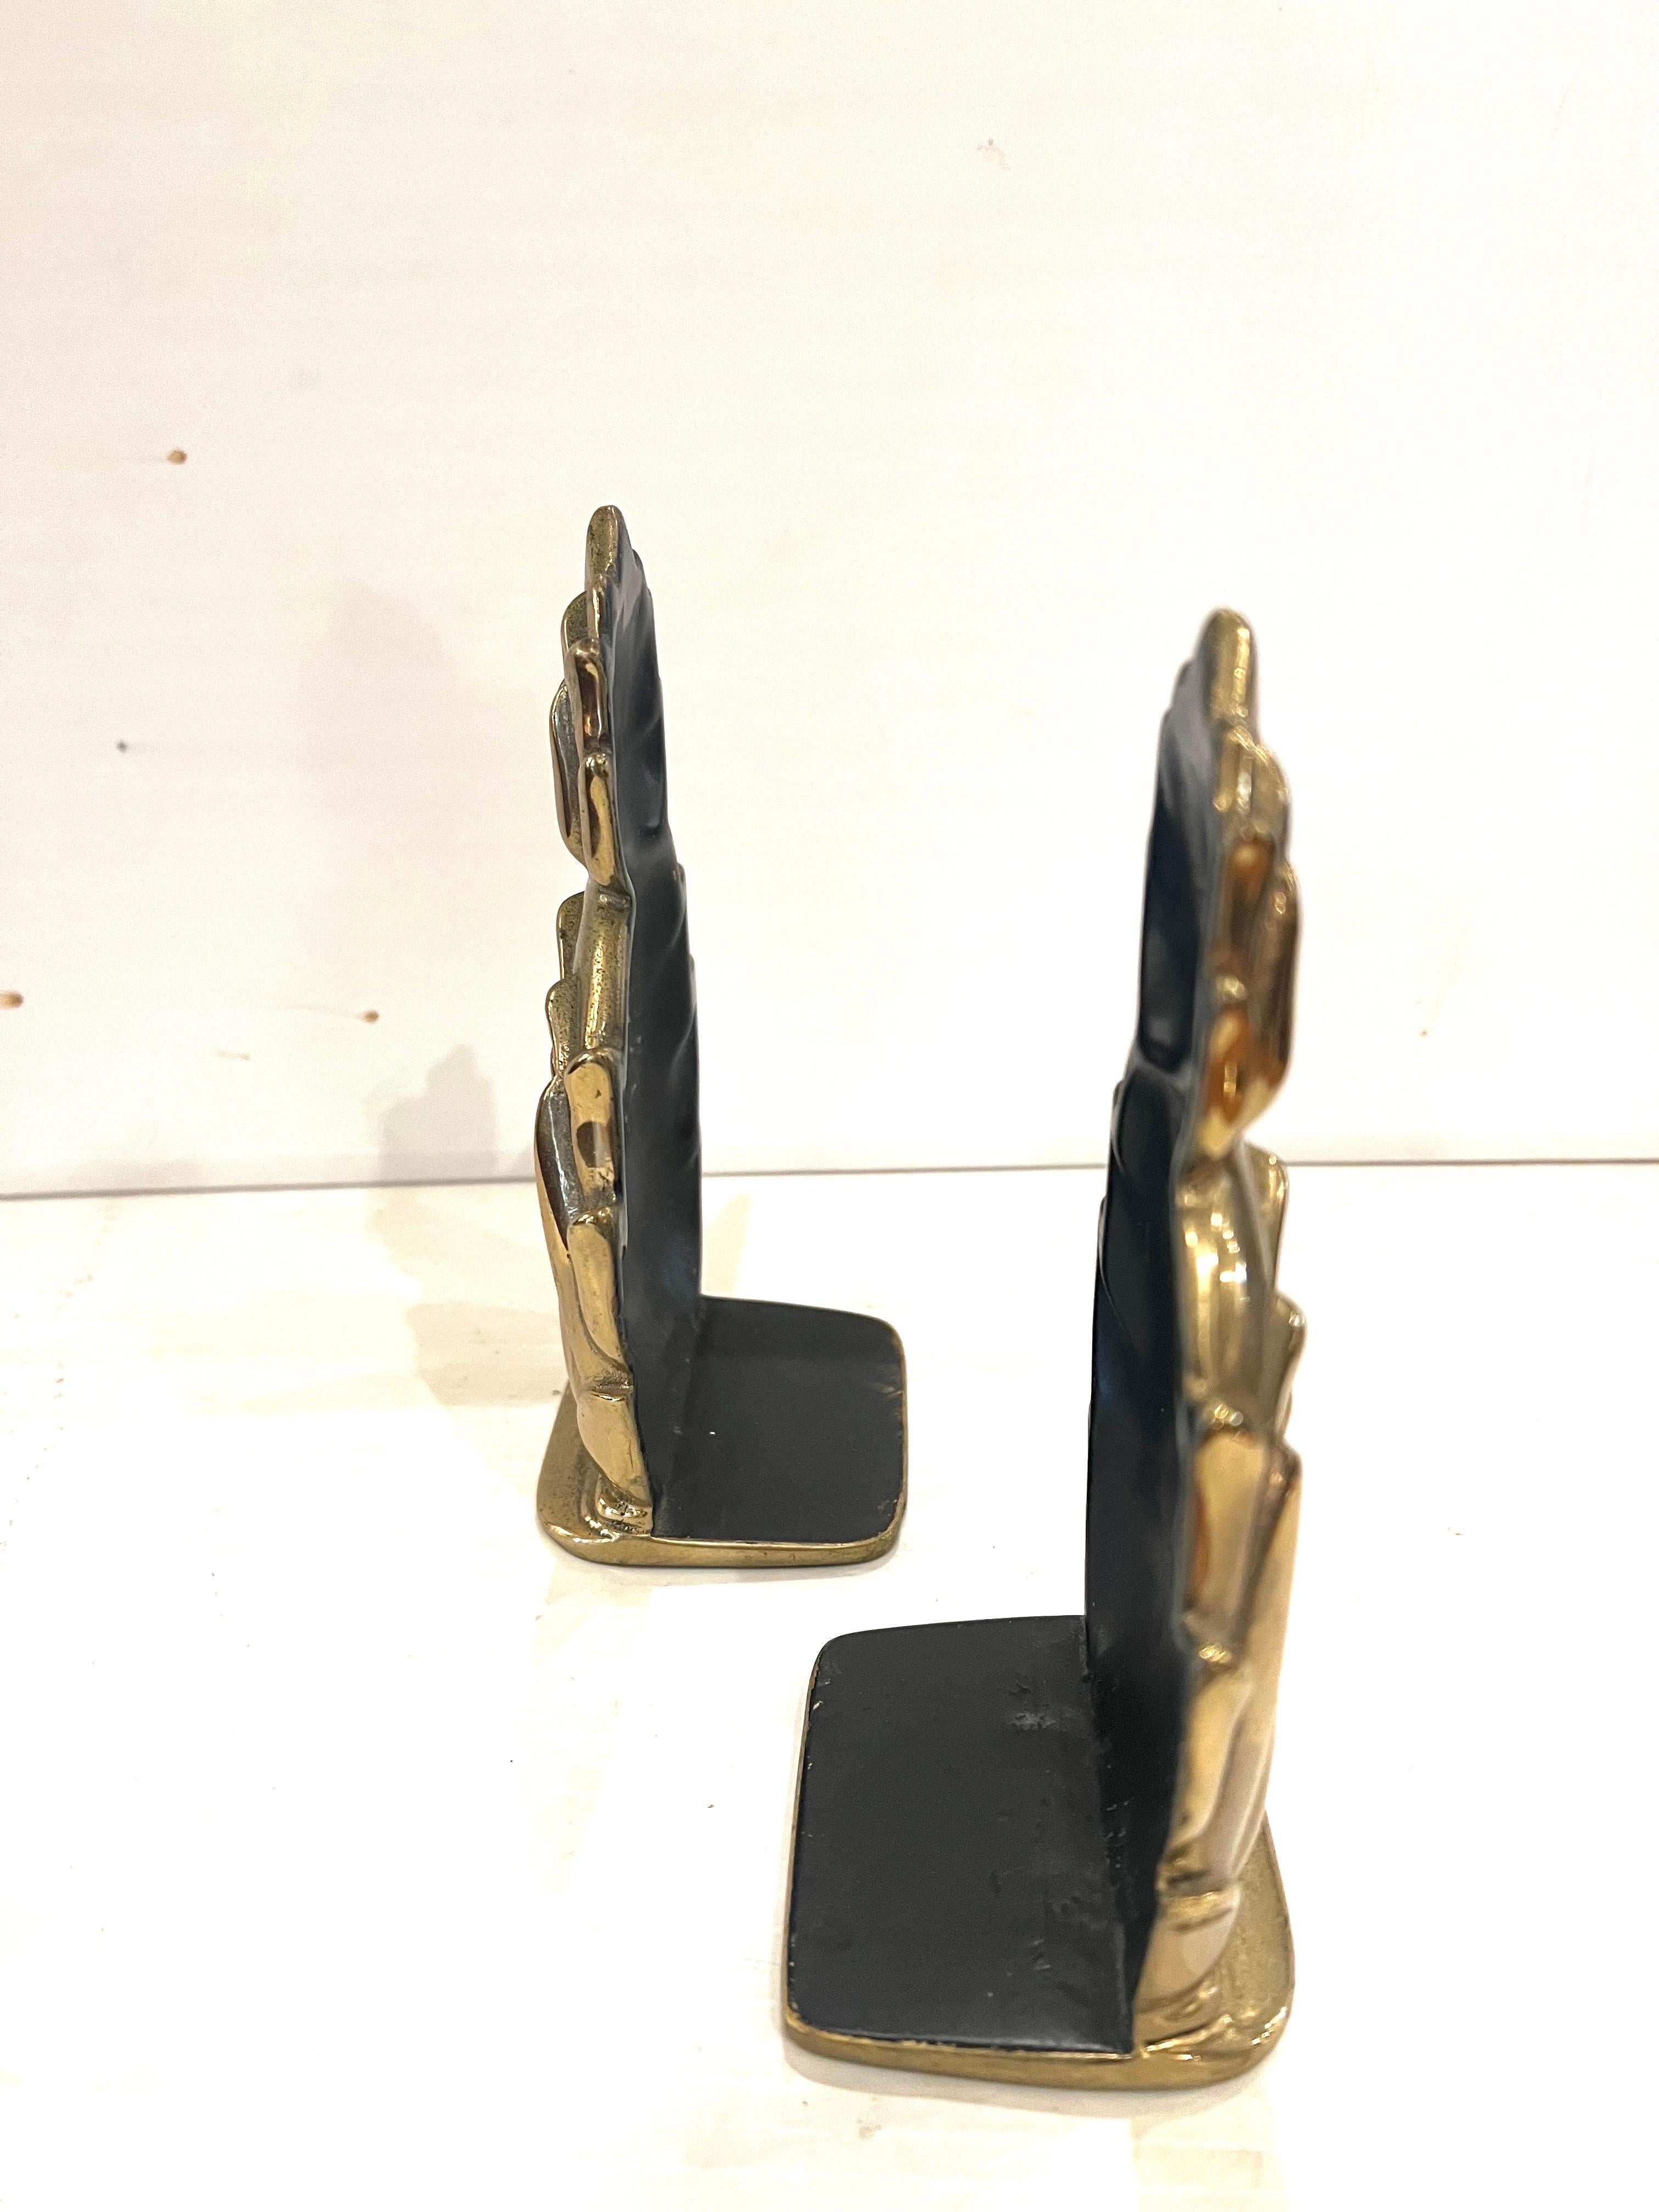 brass pineapple bookends